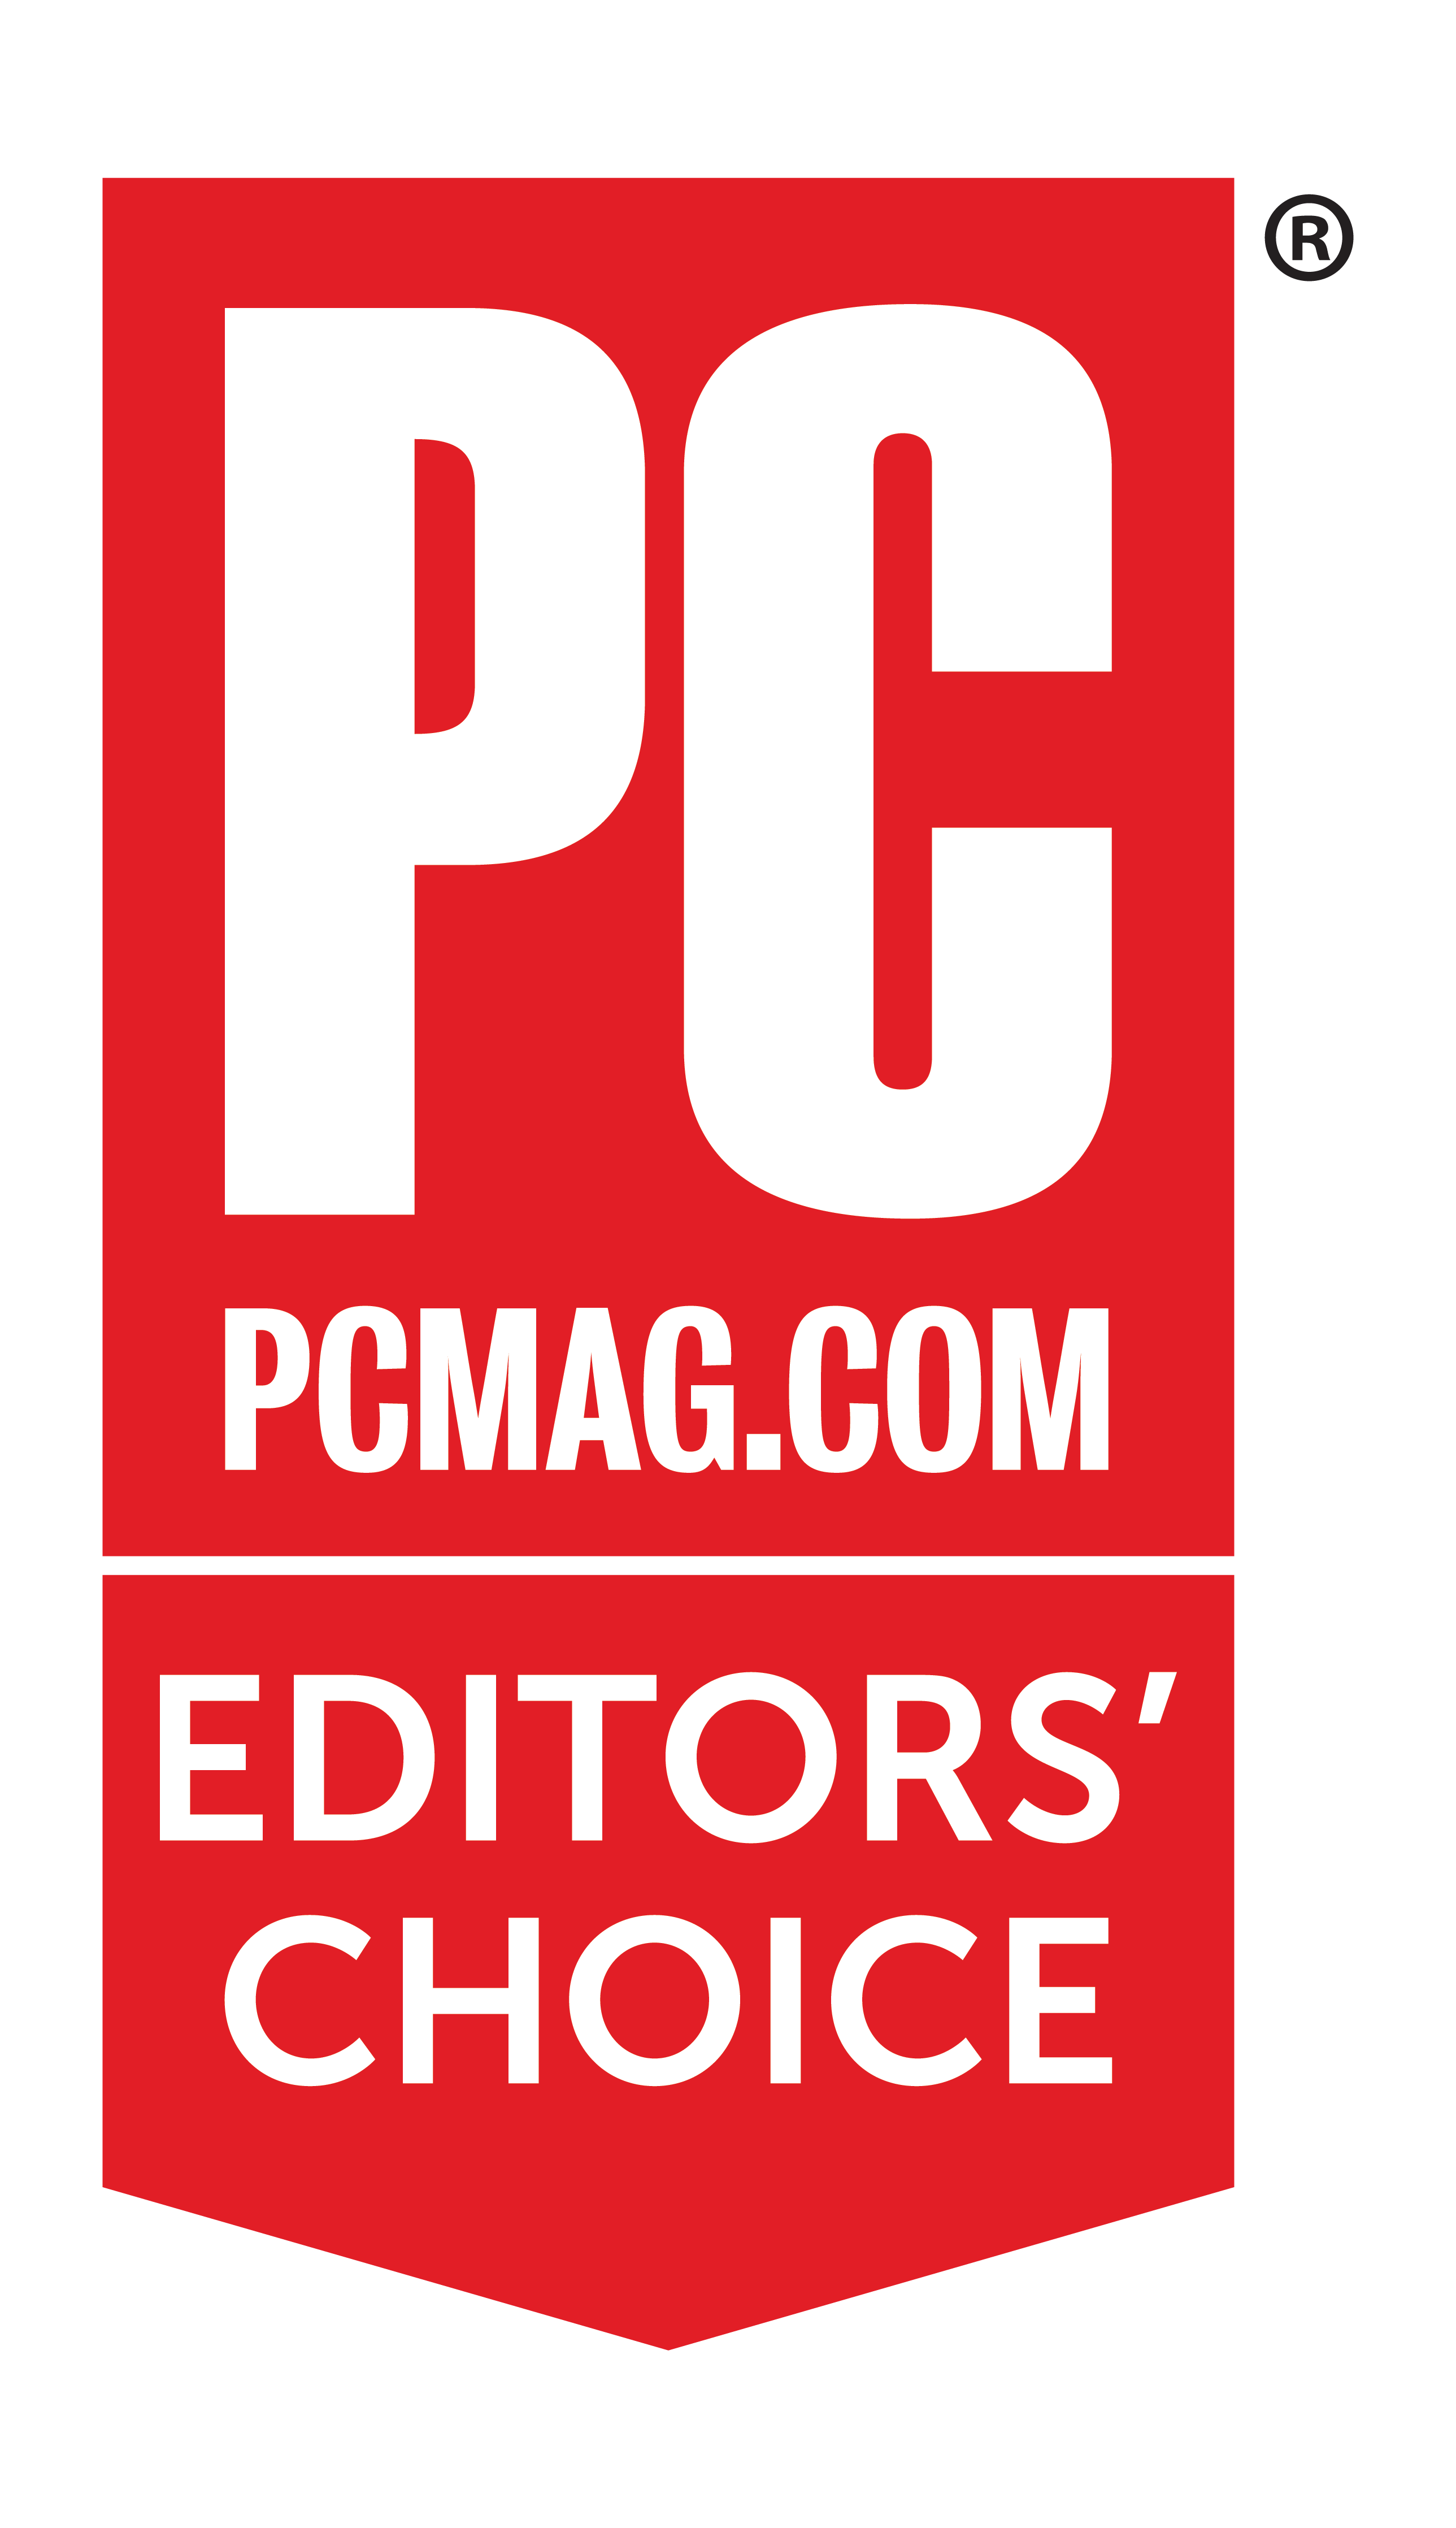 A top online payroll services for small business, according to PC Mag